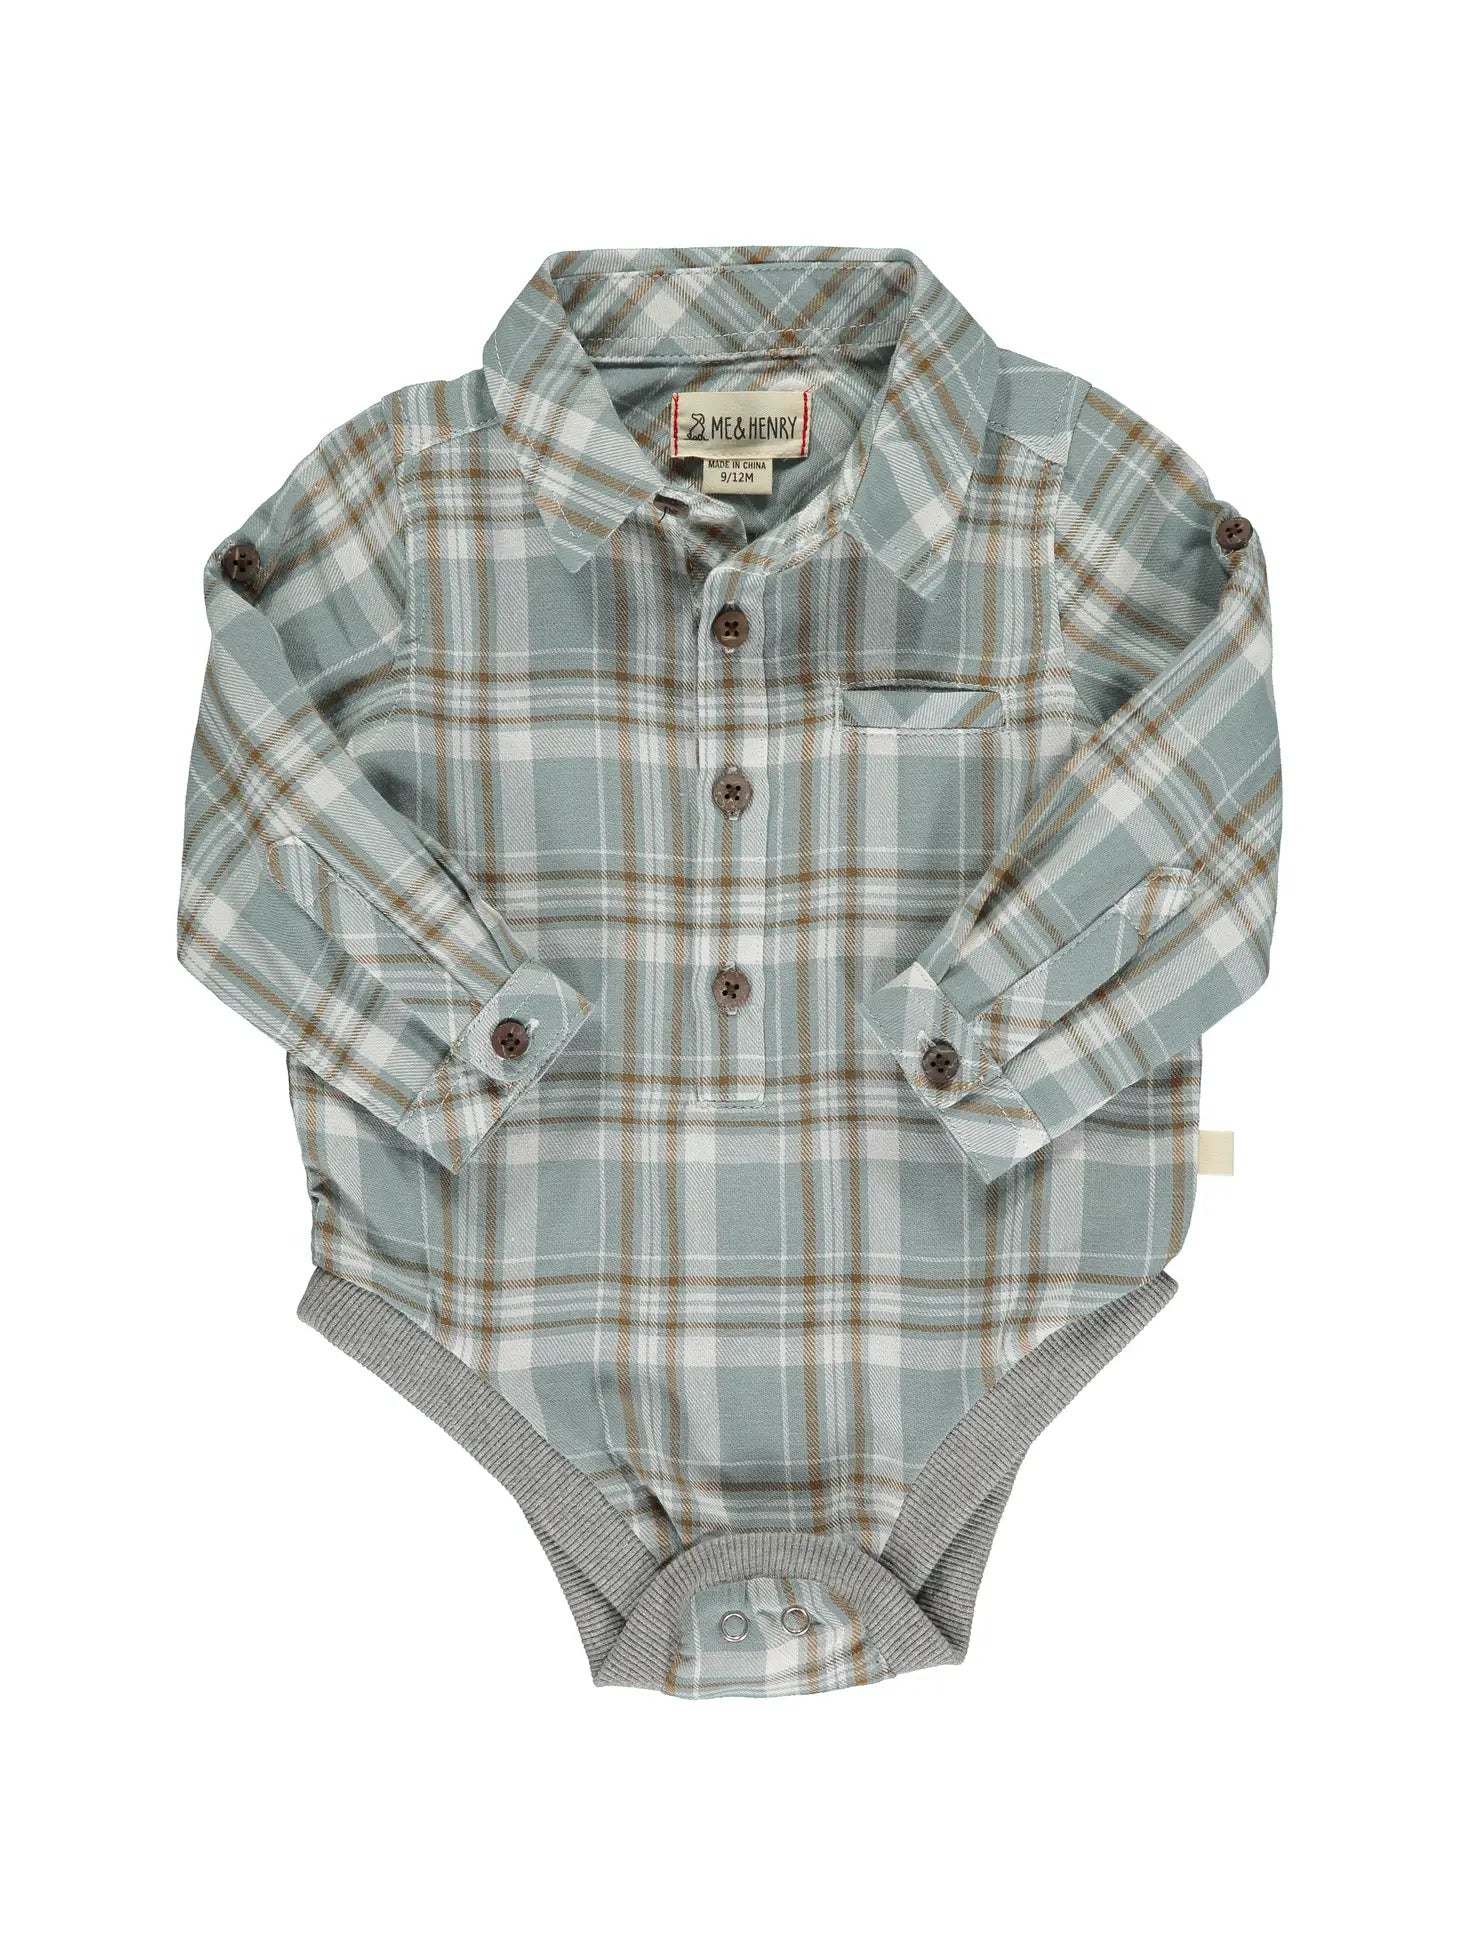 me and Henry blue and white brown plaid jasper woven onesie long sleeve collared detail baby boy